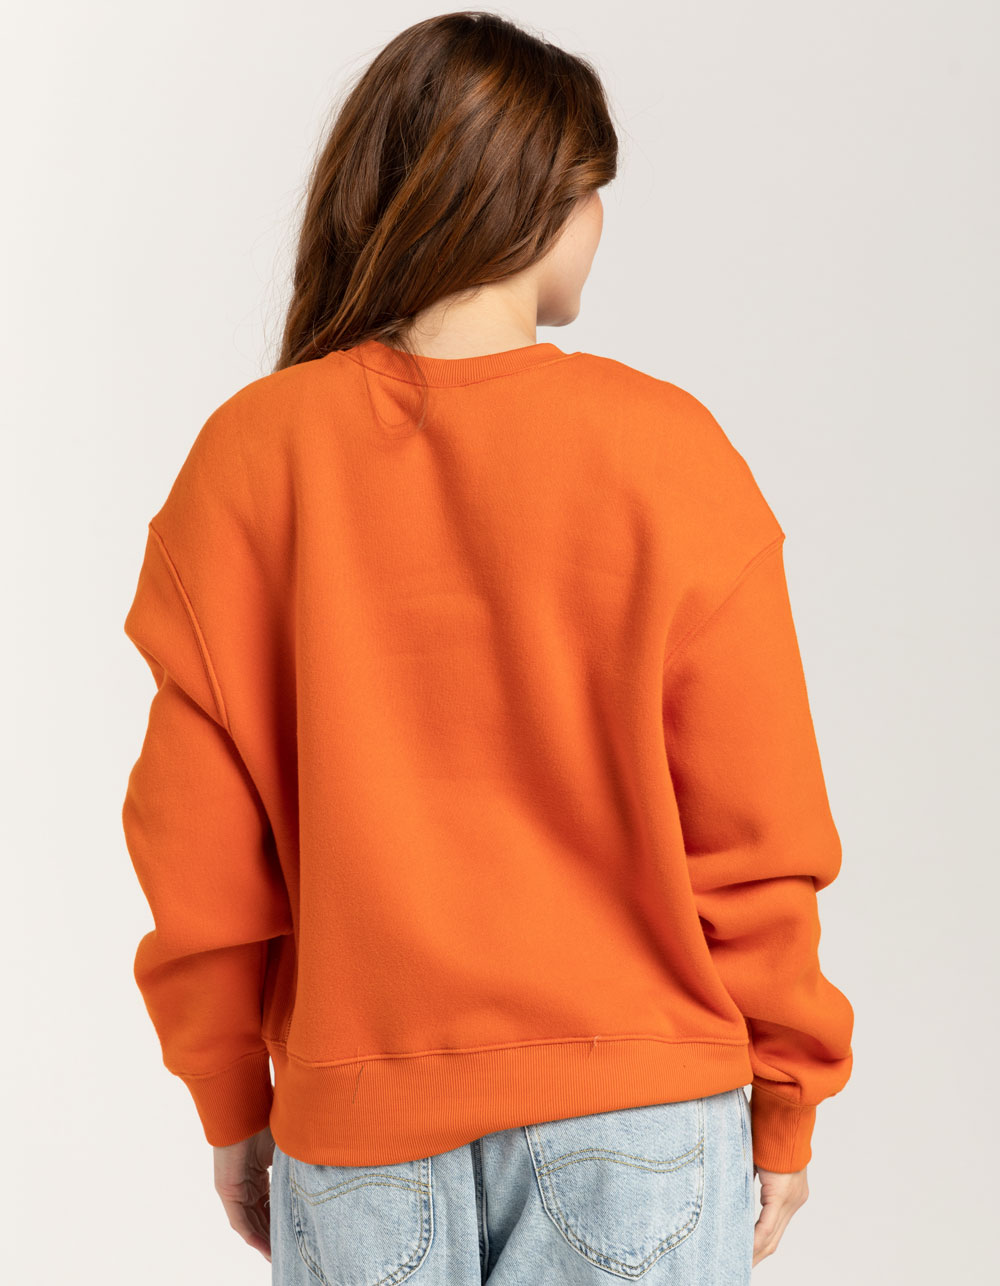 Best Selling Products Tagged Sweater - LOTWSHQ